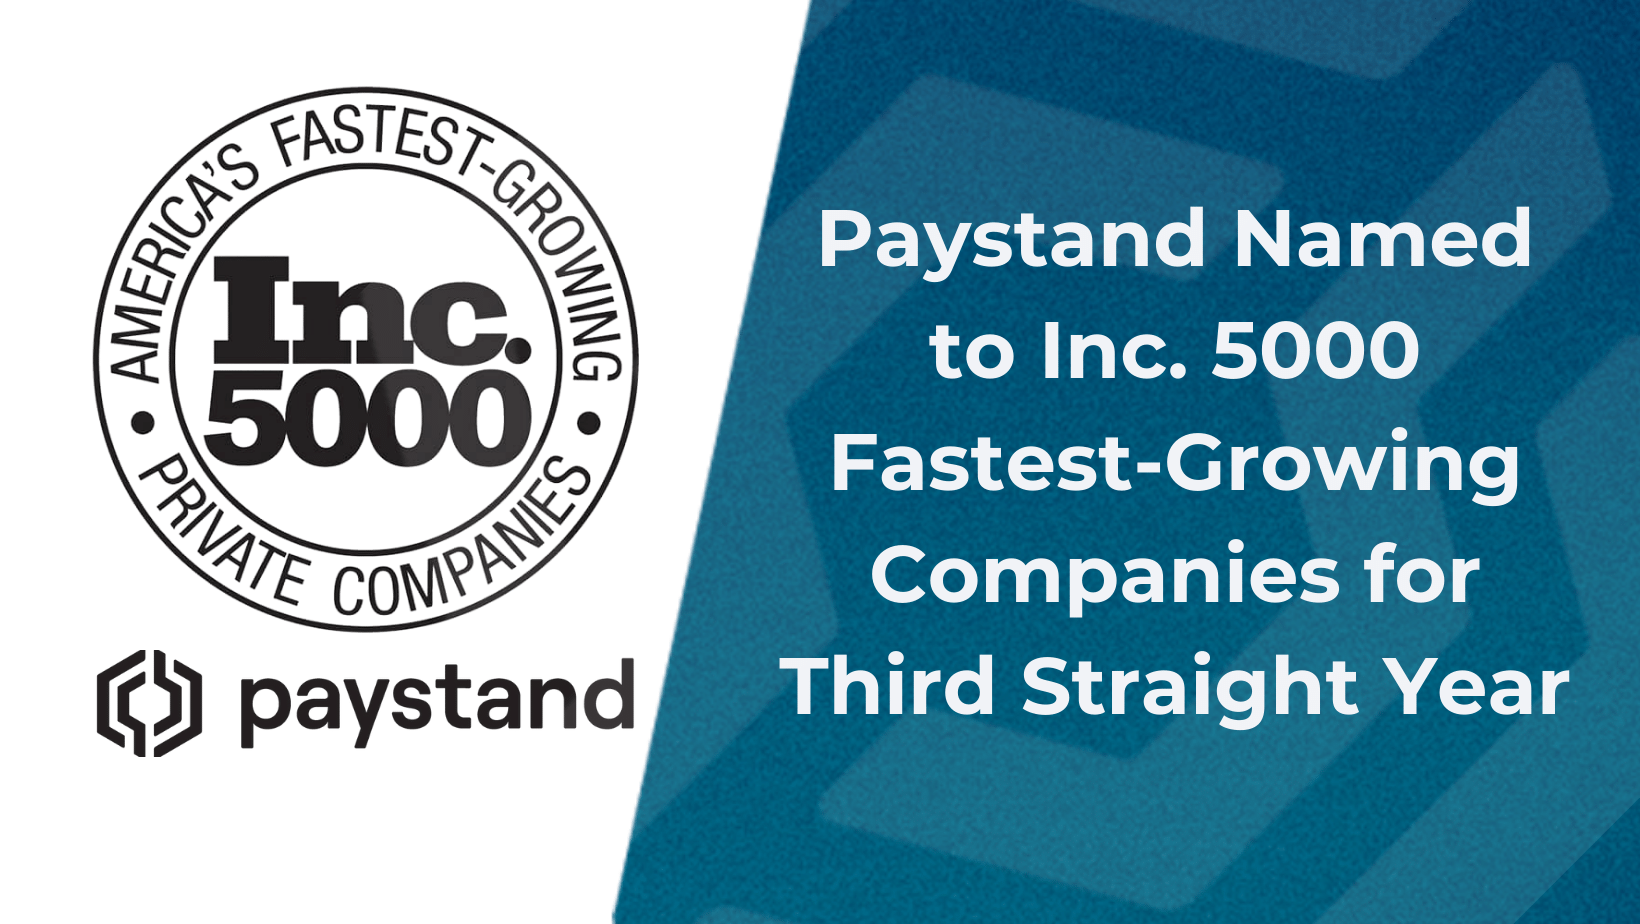 Paystand Named to Inc. 5000 Fastest-Growing Companies for Third Straight Year